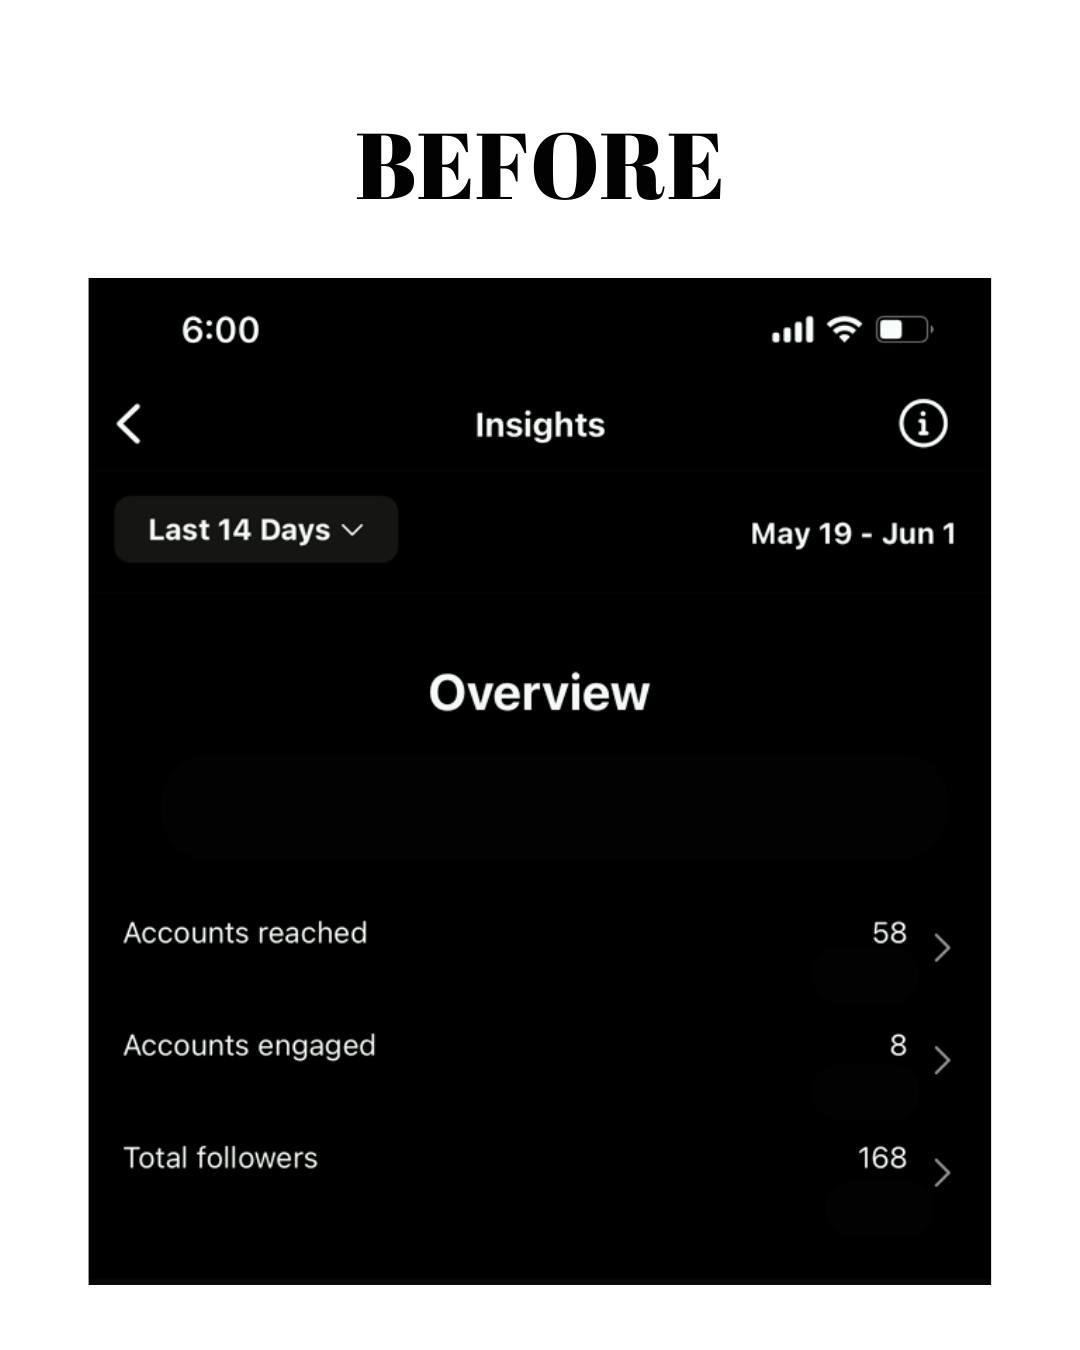 instagram insights for reach, engagement, and following